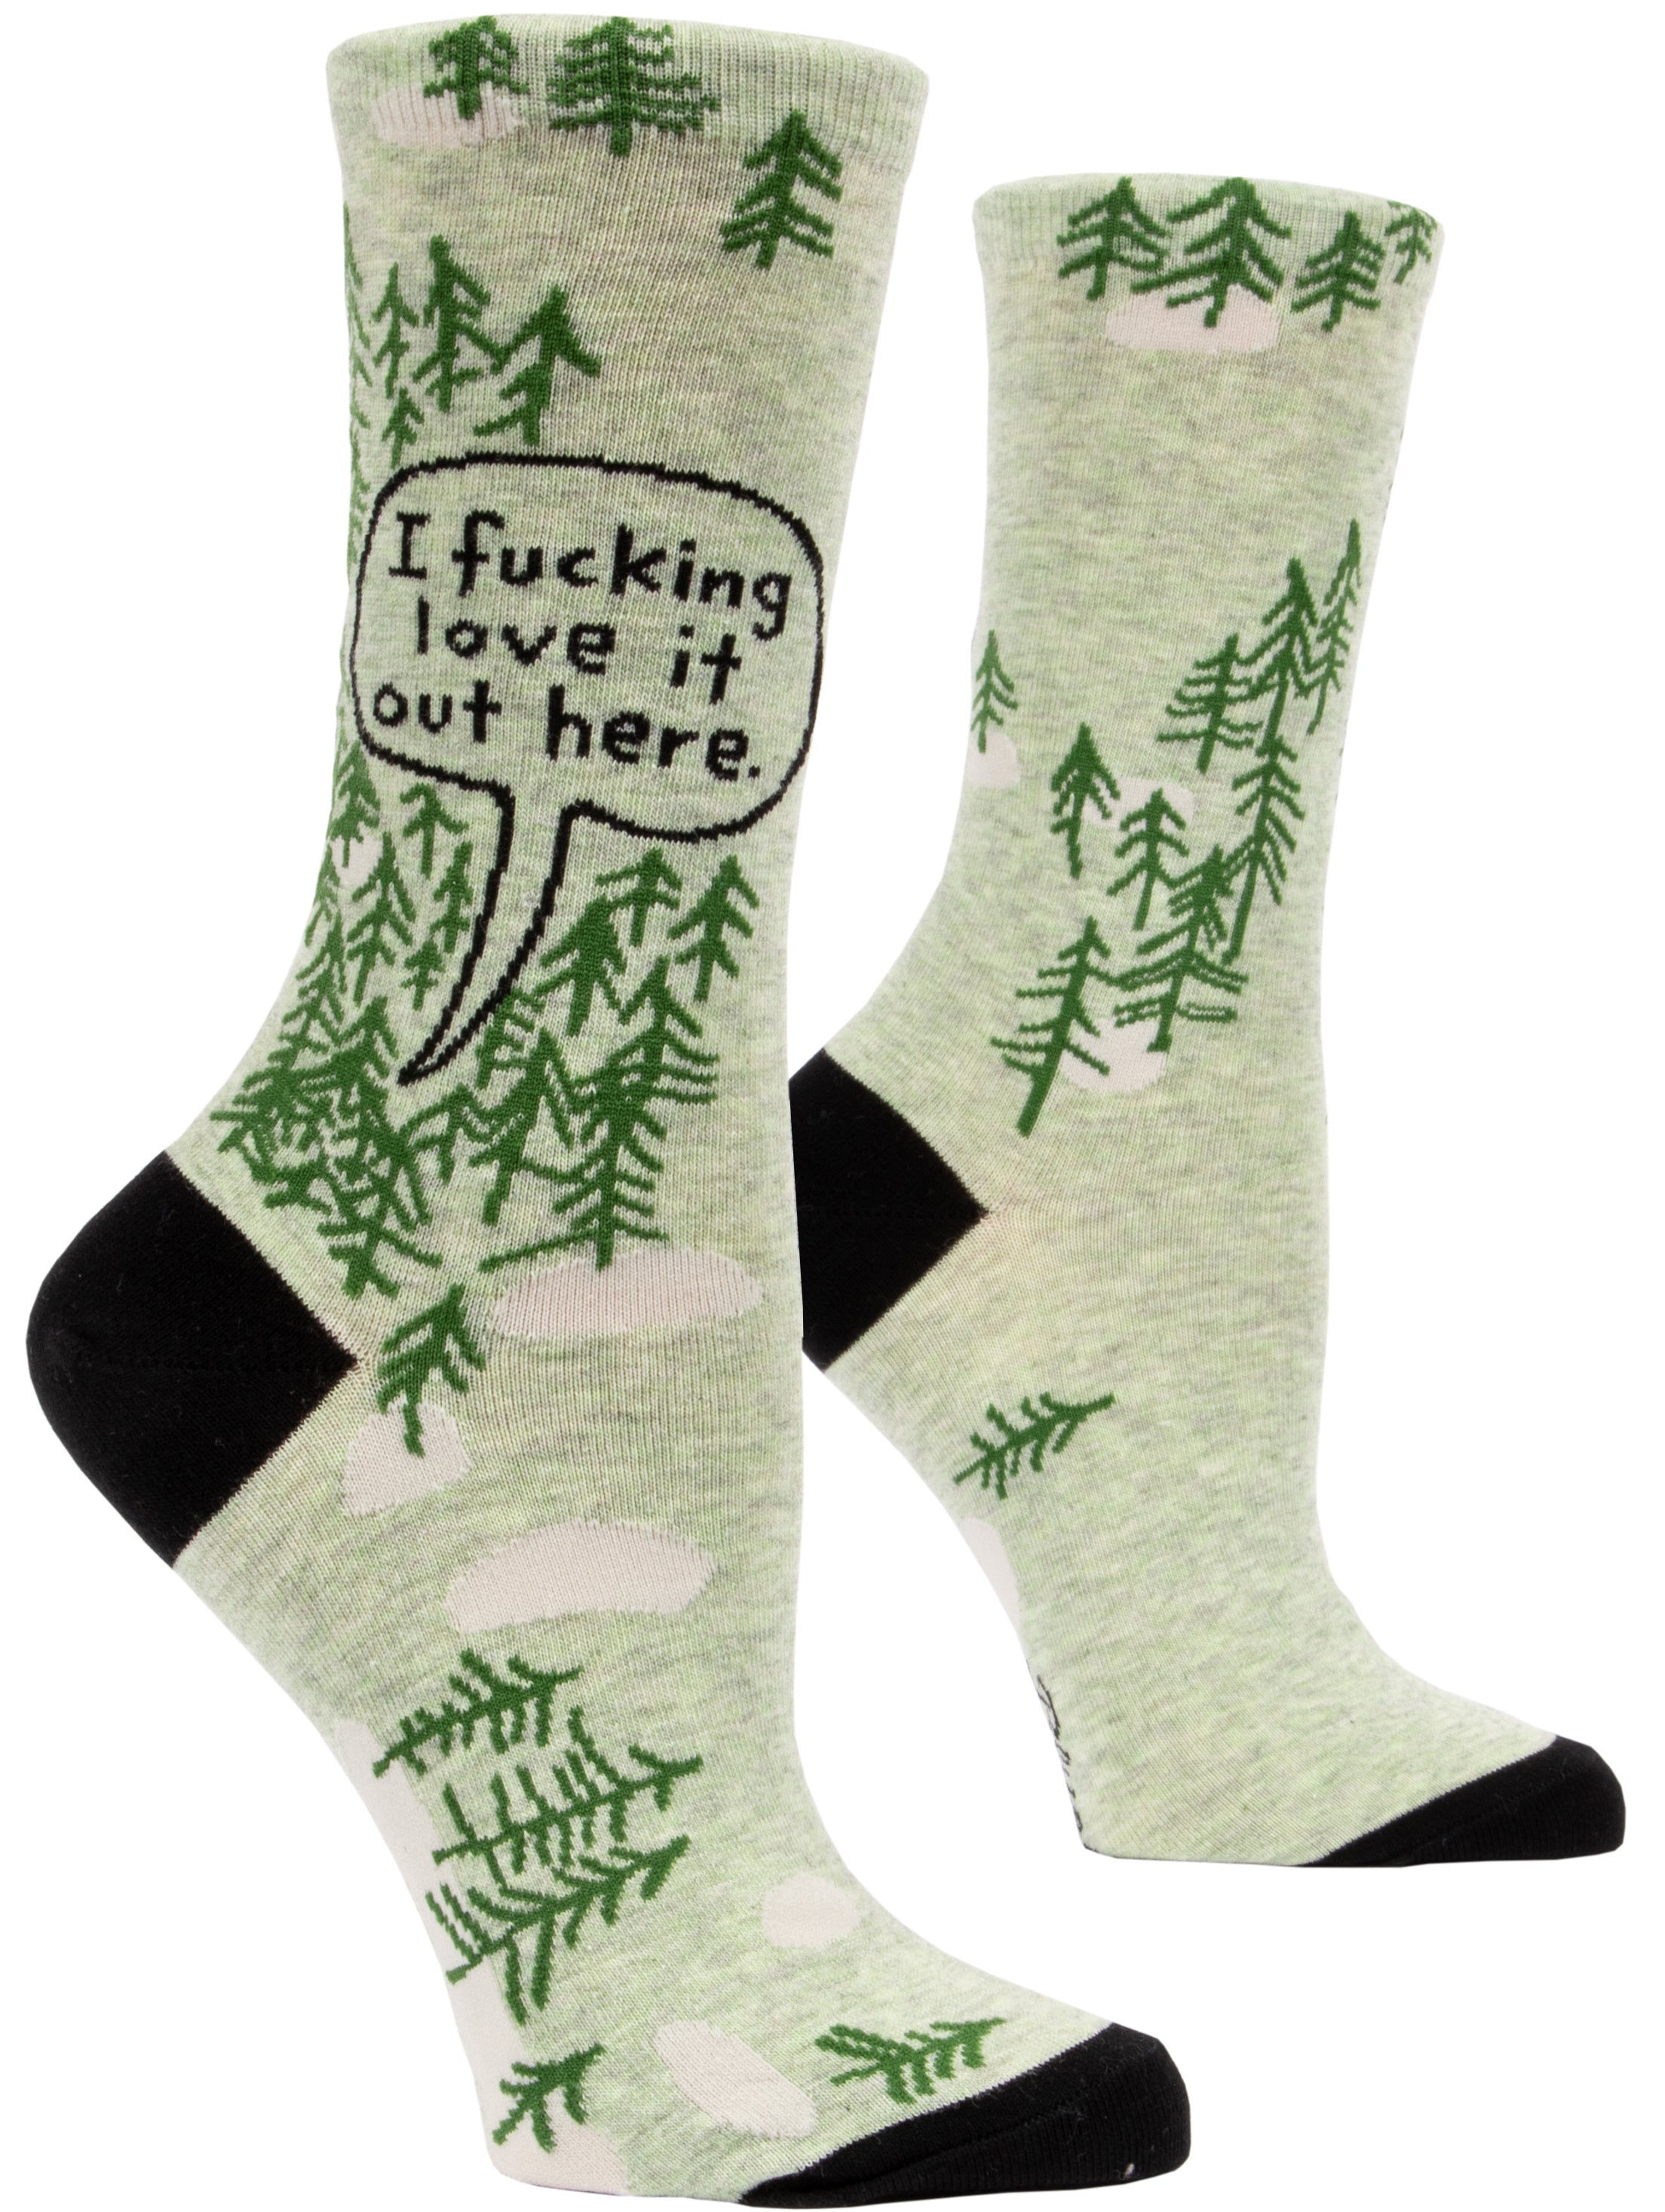 green socks with cartoon trees and black toa and heel on ankle in word bubble it says i fucking love it out here